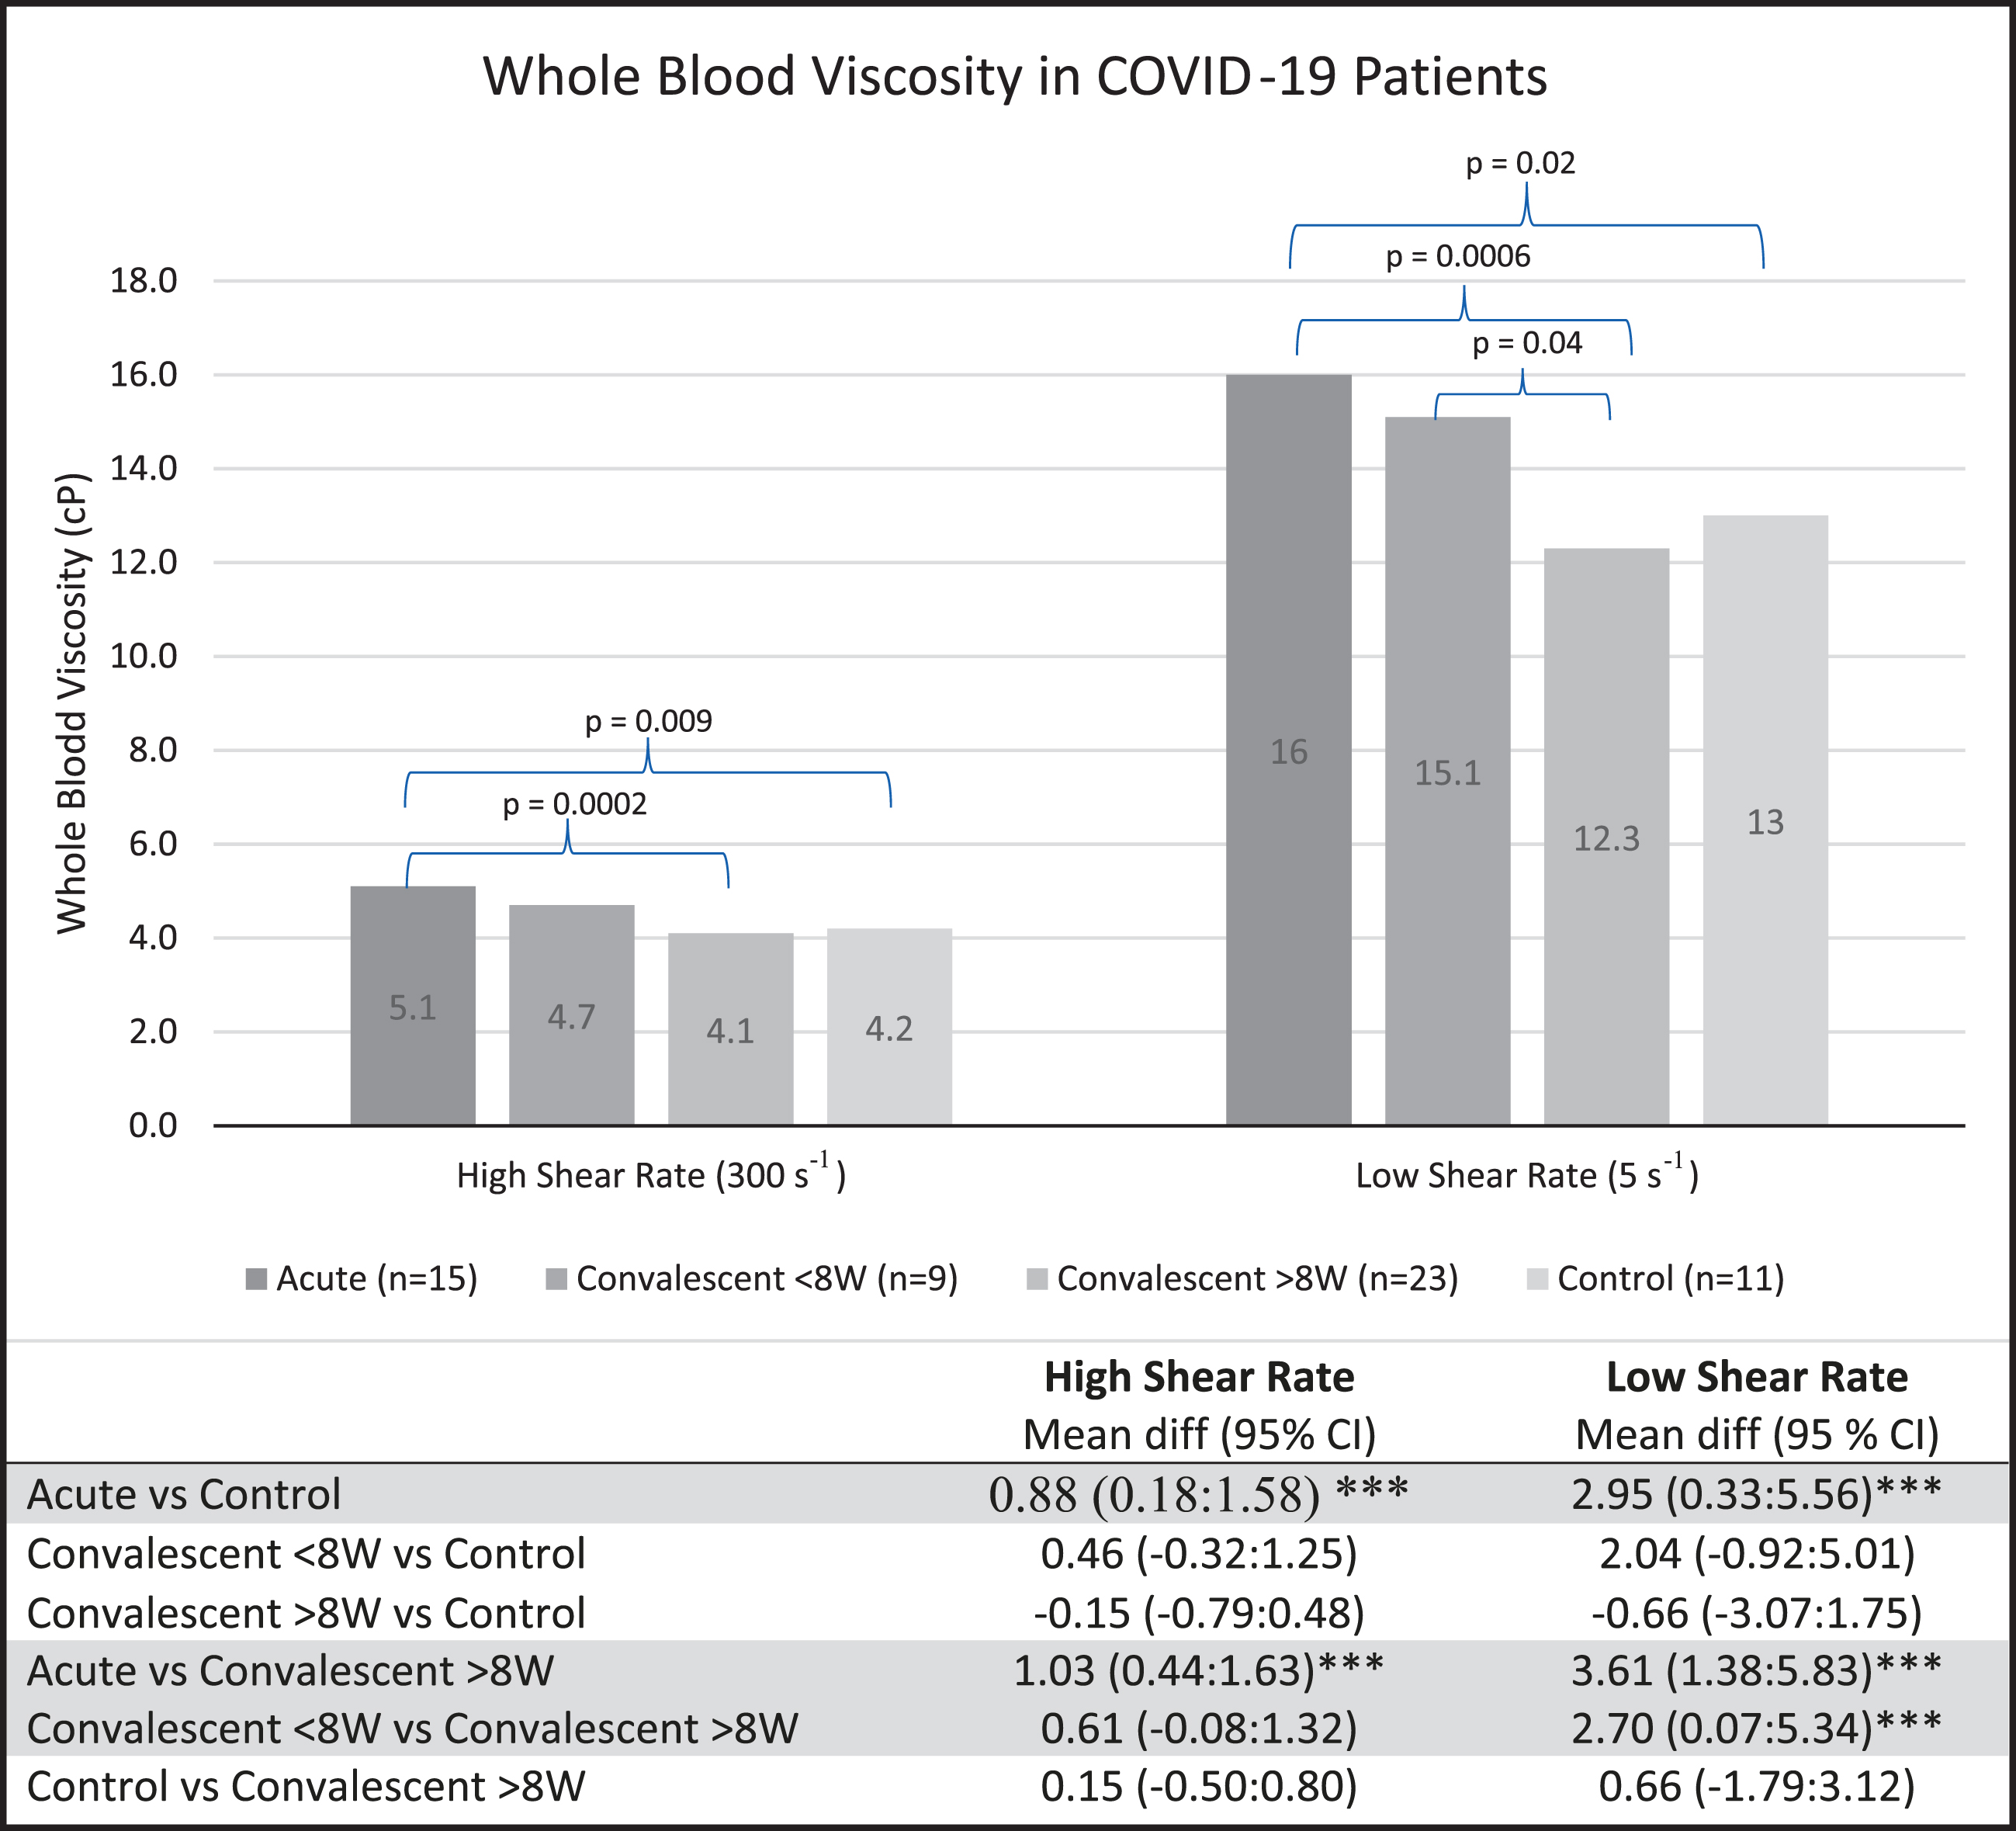 WBV is significantly higher in patients with acute COVID-19 and in convalescent patients < 8 W than in controls and convalescent patients > 8 W. Data expressed as means±standard deviation. Statistical analysis done with ANOVA with Dunnett’s test: mean difference in whole blood viscosity (95% Confidence Intervals). cP, centipoise; ***, significant; W, weeks; WBV, whole blood viscosity.